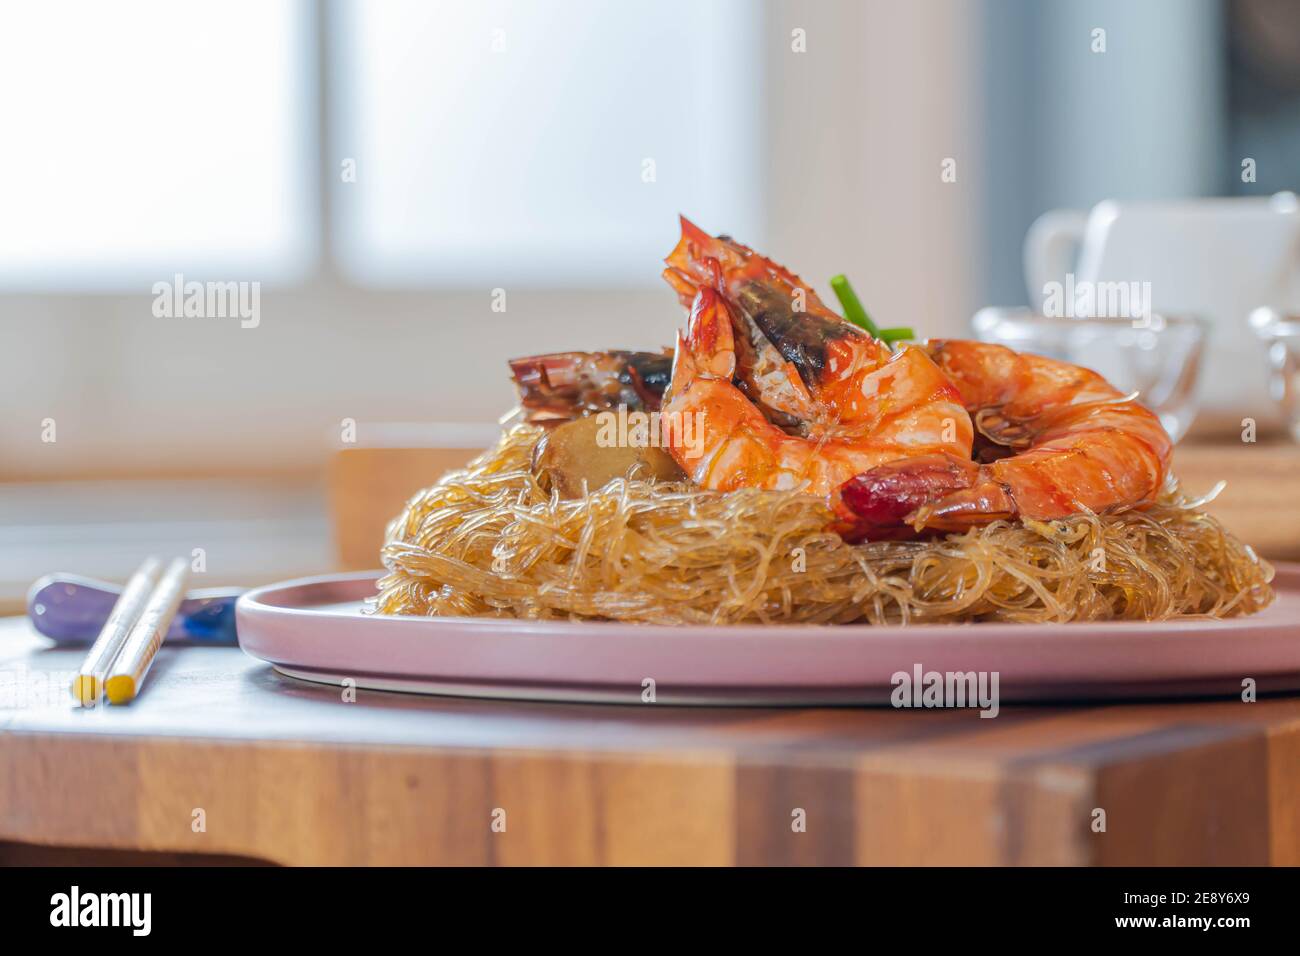 Baked Shrimp with Glass Noodles, a traditional Thai food wrapped in heat-treated freud paper and chopsticks, ready to serve-eat Stock Photo